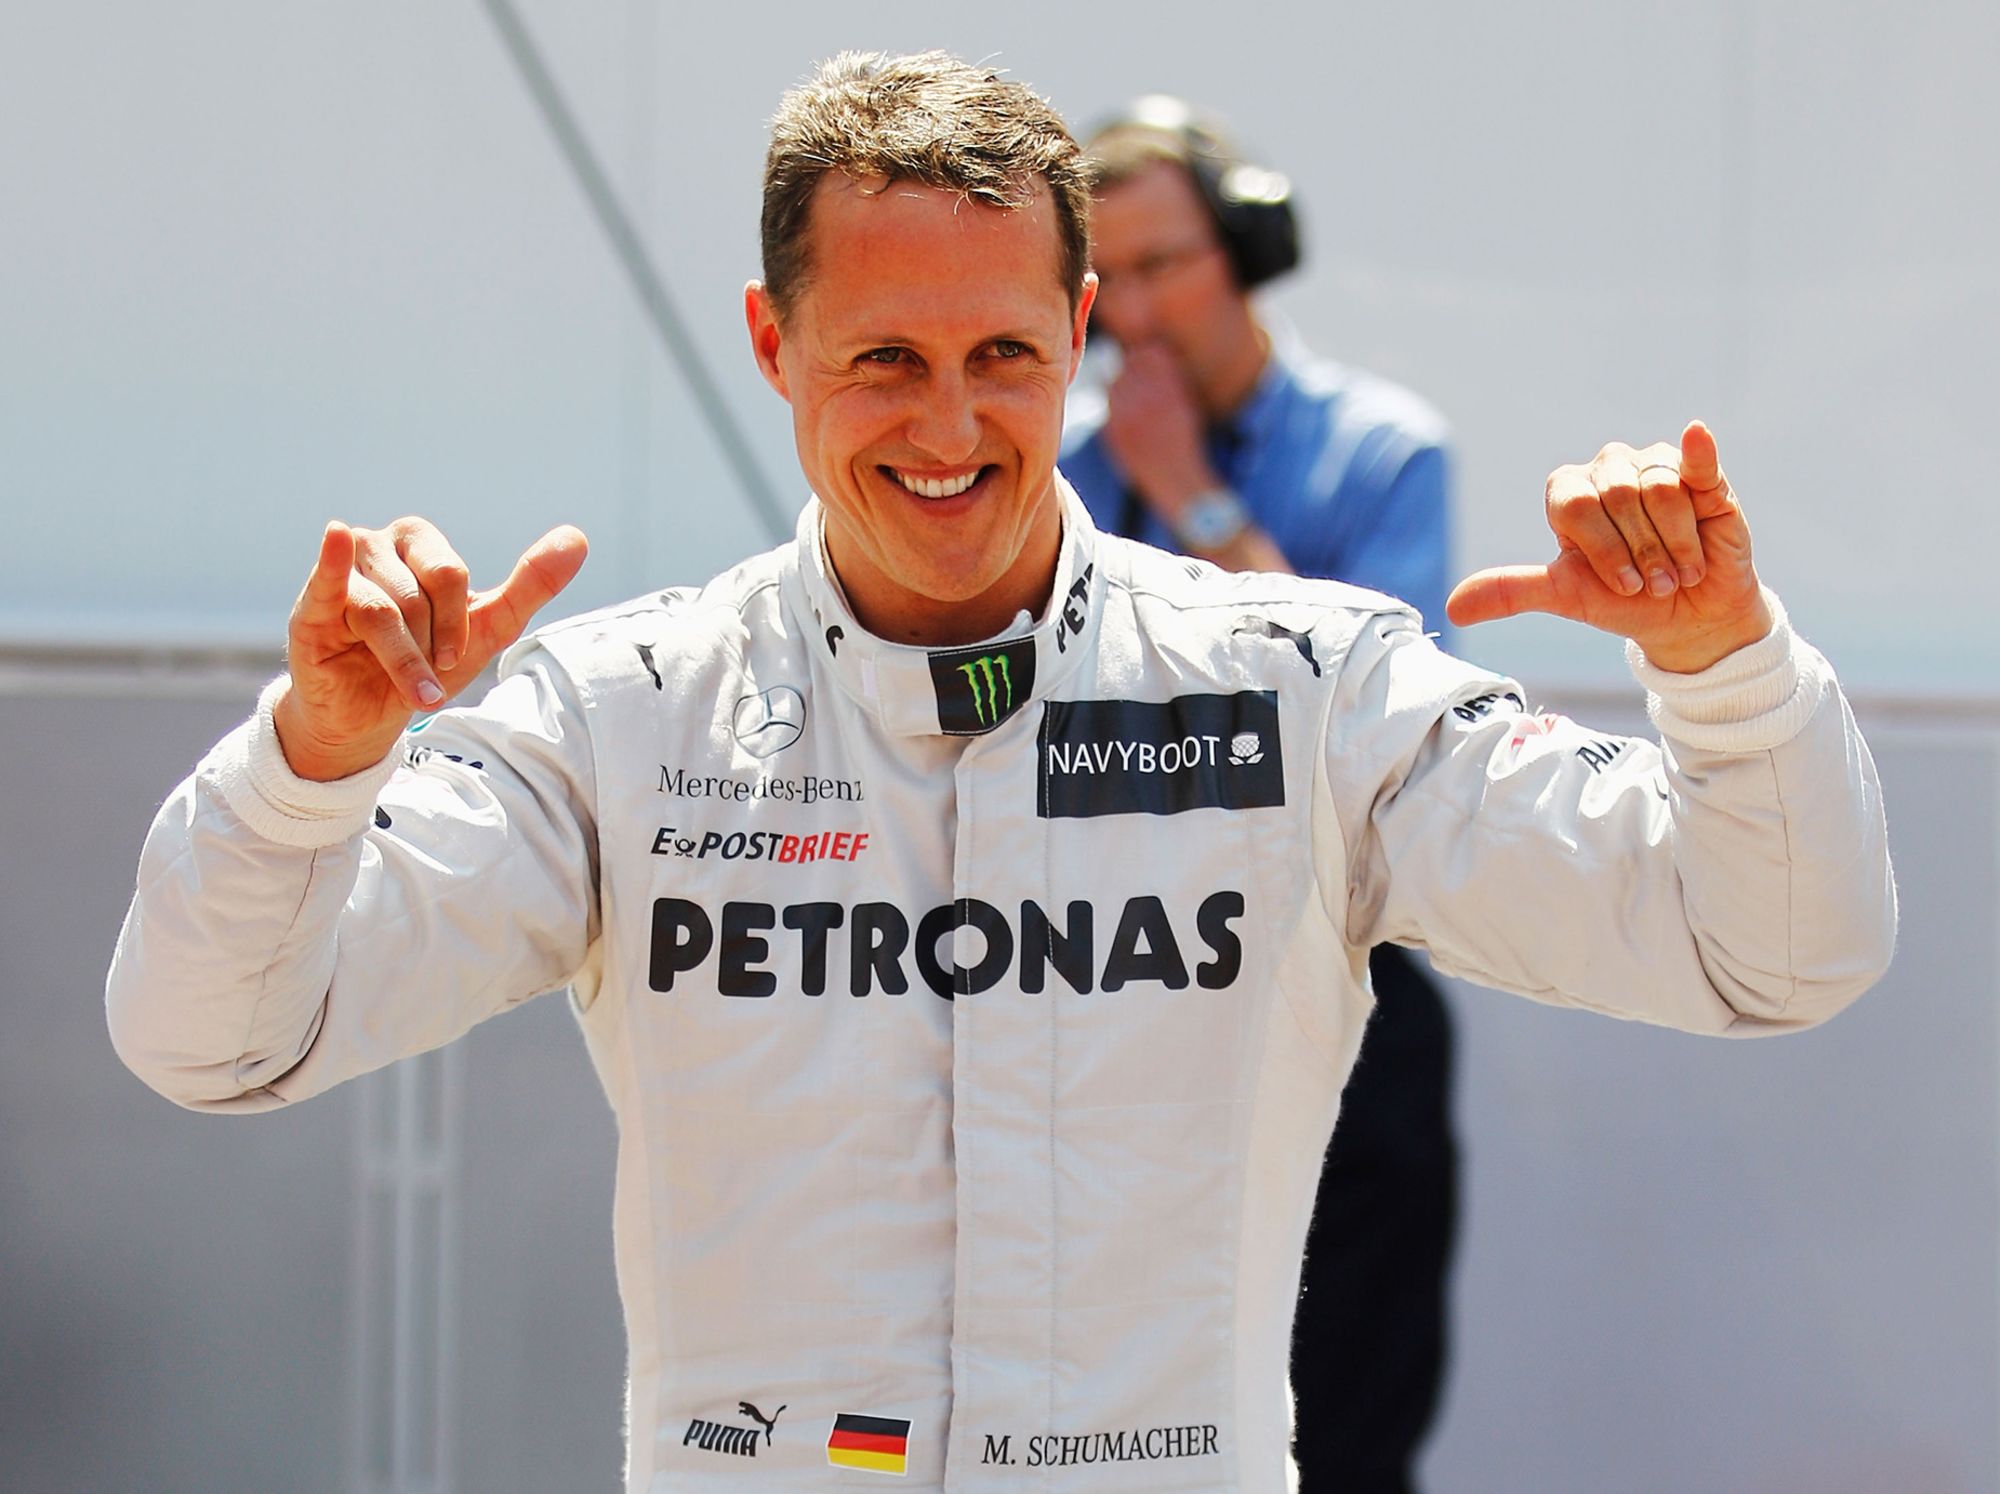 Michael Schumacher won seven Formula One Driver's World Championships, and some of his luxury personalised watches uniquely celebrate these victories.